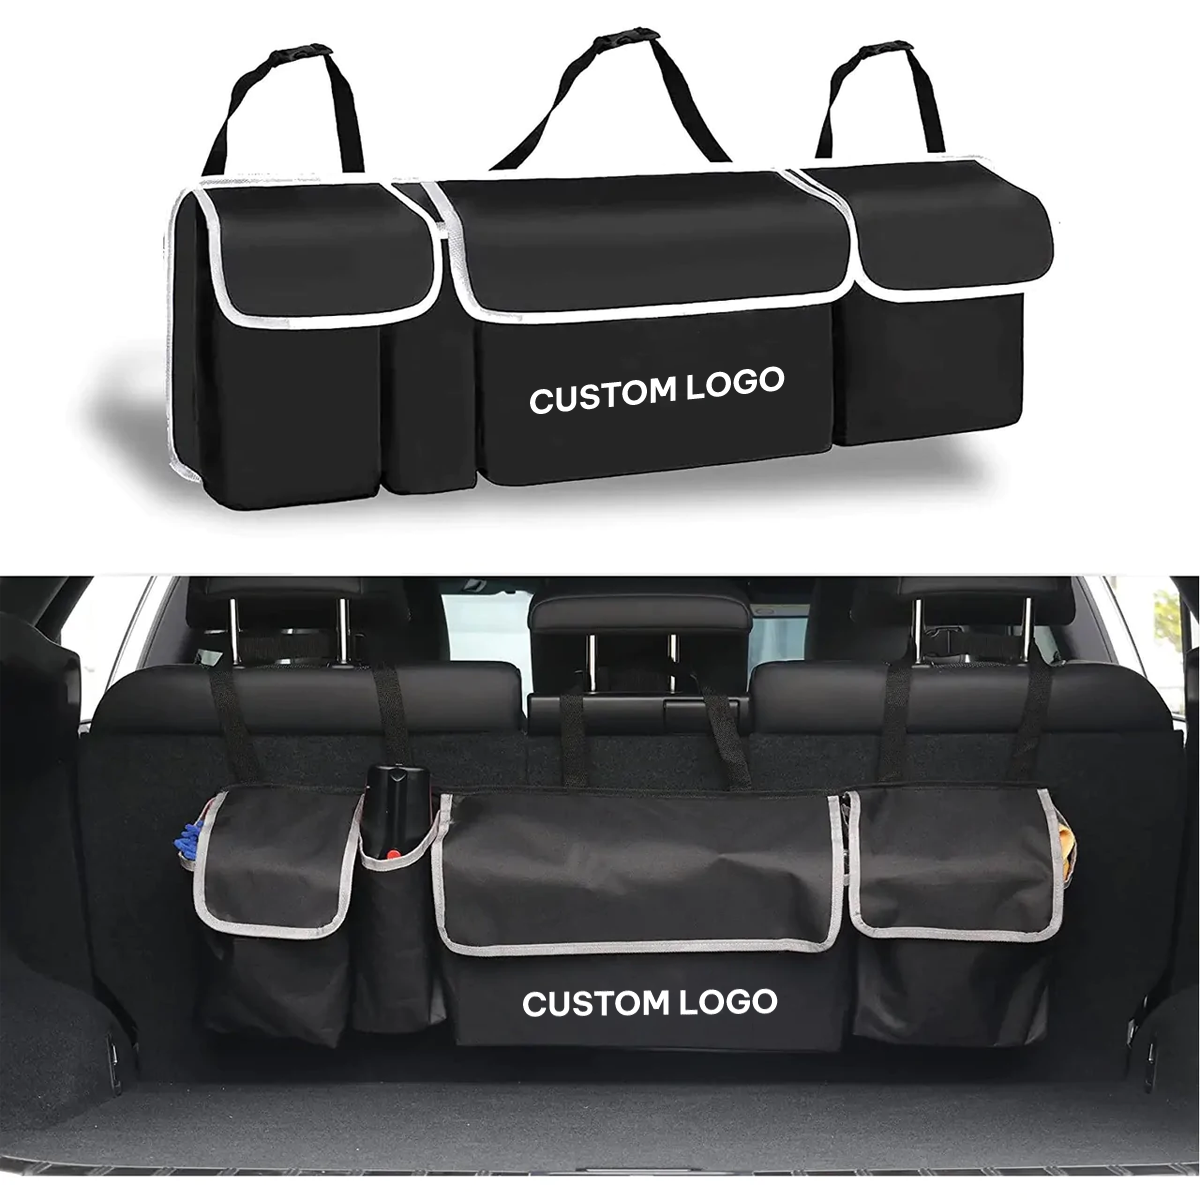 Custom Logo Car Trunk Hanging Organizer, Thick Backseat Trunk Storage Bag with 4 Pockets and 3 Adjustable Shoulder Straps, Foldable Car Trunk Interior Accessories Releases Your Trunk Space